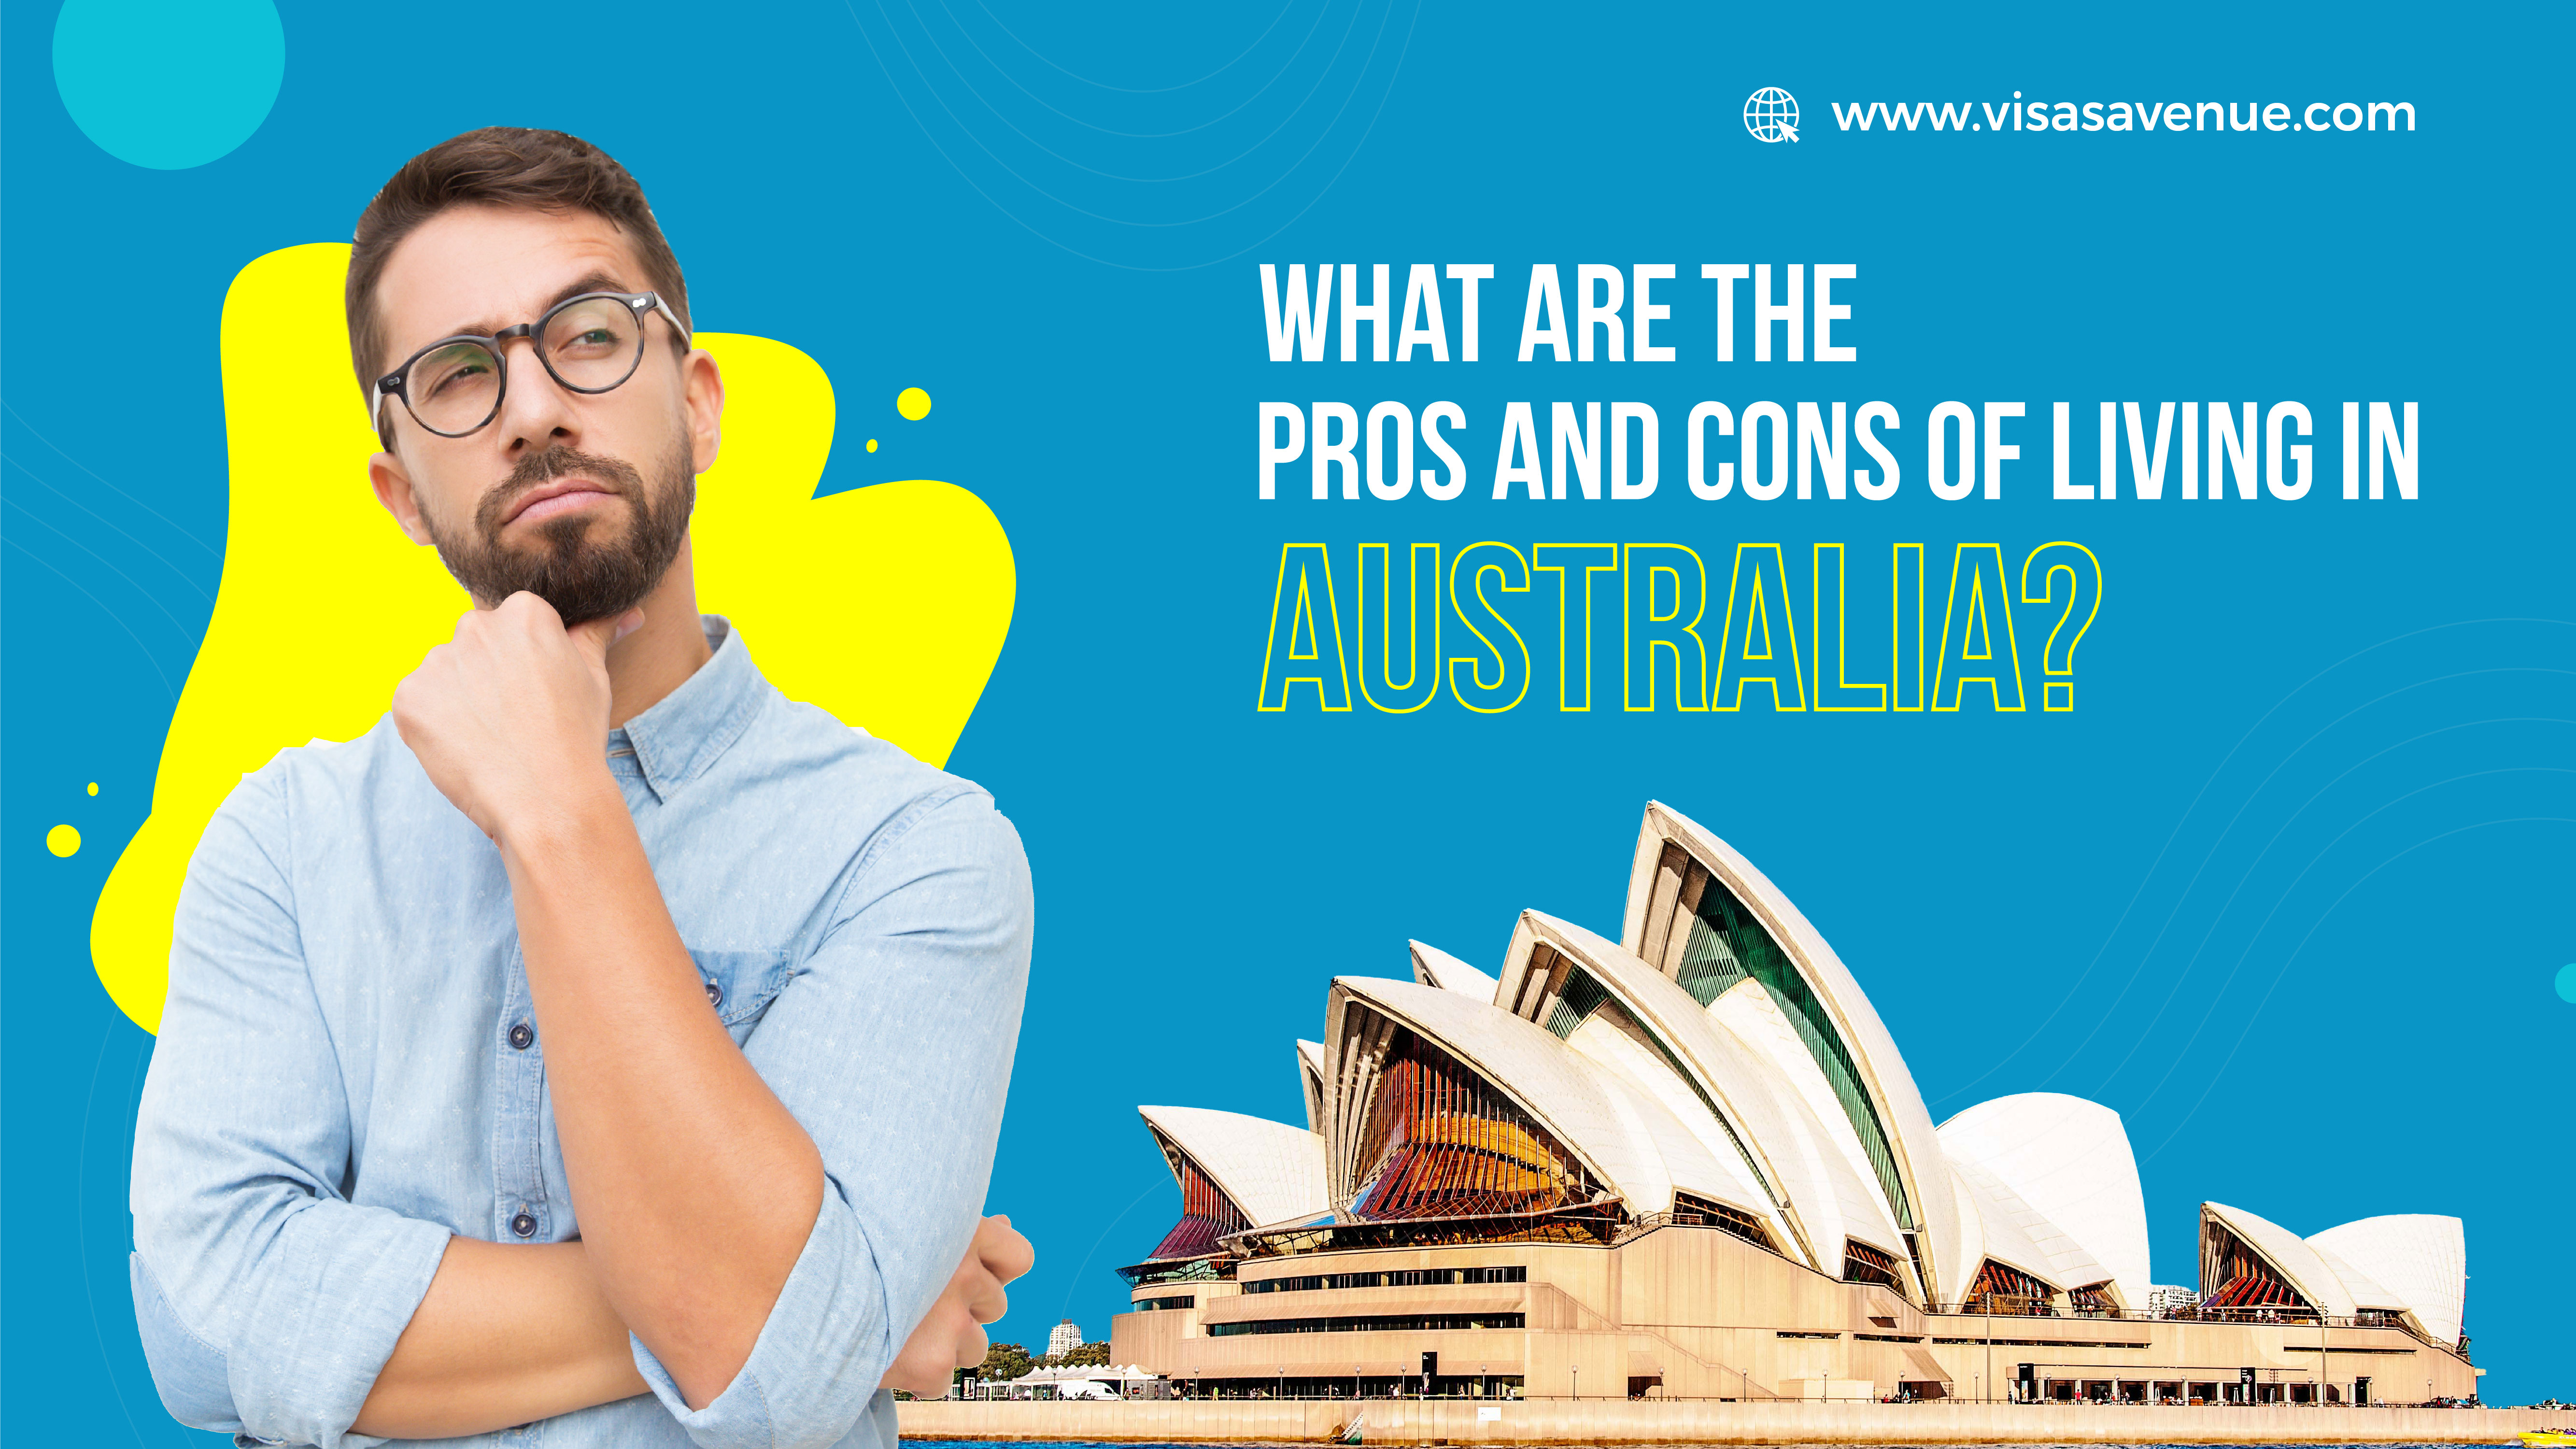 What are the pros and cons of living in Australia?